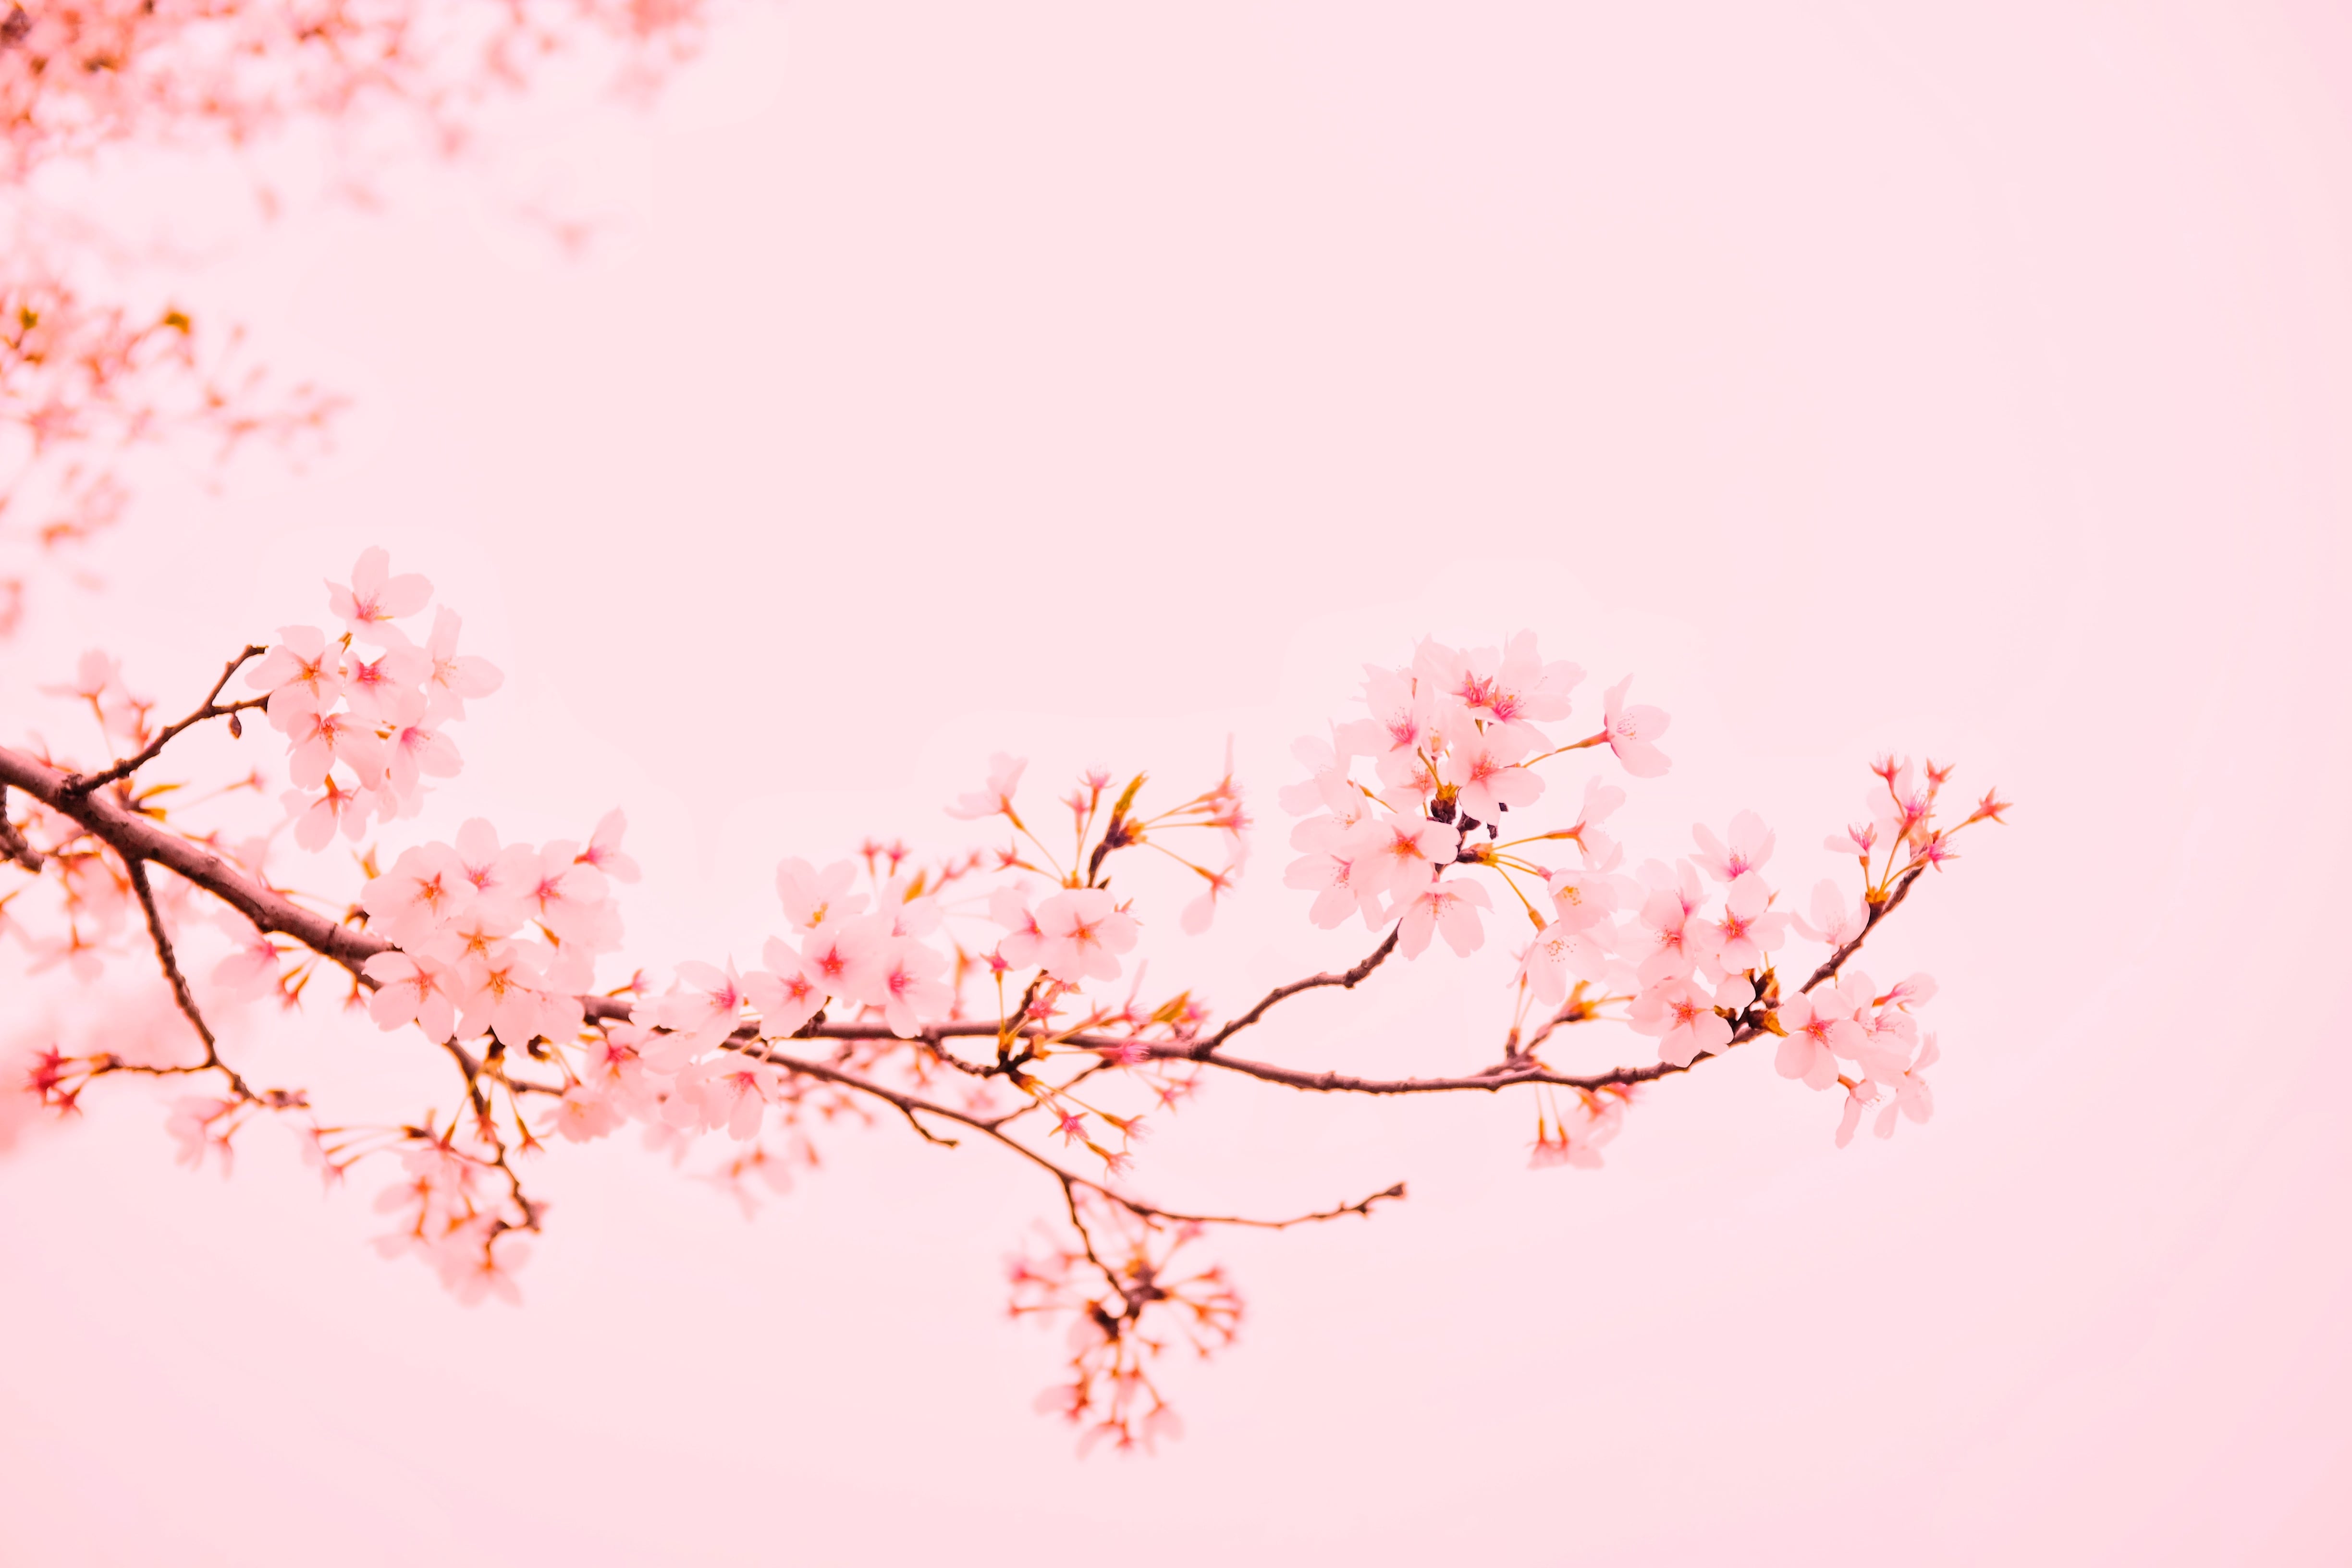 Beautiful Free Spring Wallpaper and Spring Desktop Backgrounds